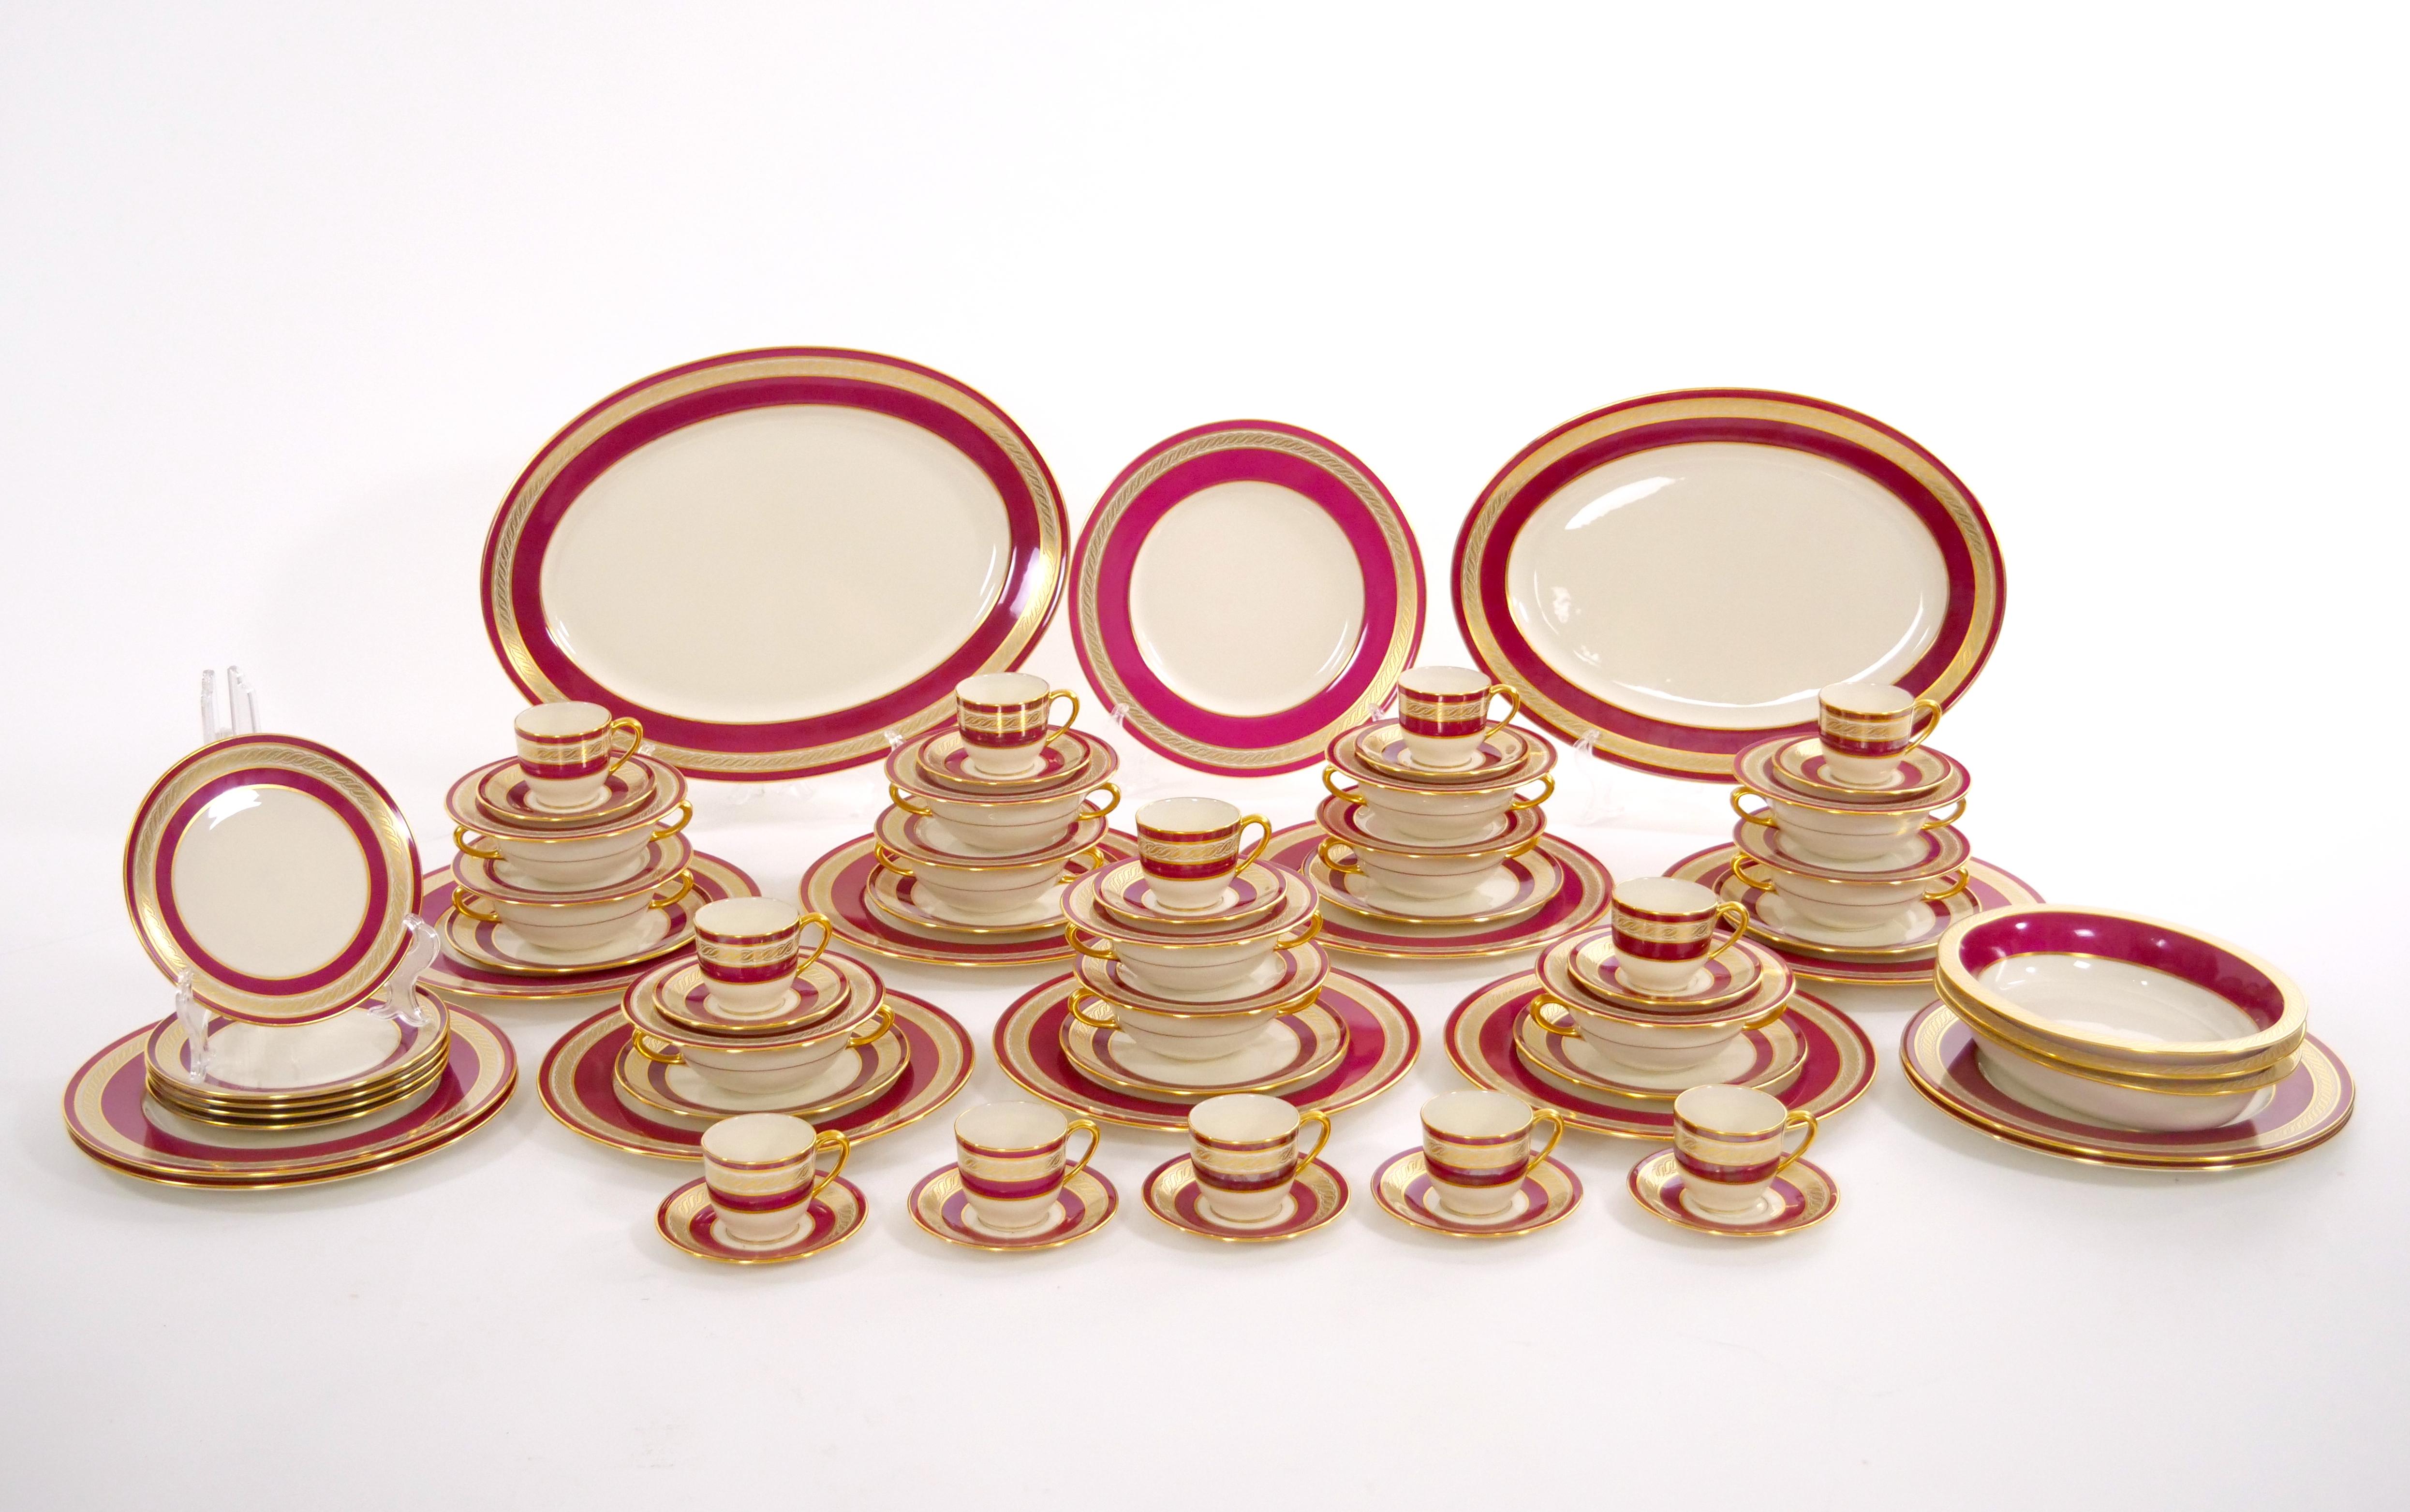 American Porcelain/Gilt Braid Decorated By Lenox for J.E Caldwell Dinner Set In Good Condition For Sale In Tarry Town, NY